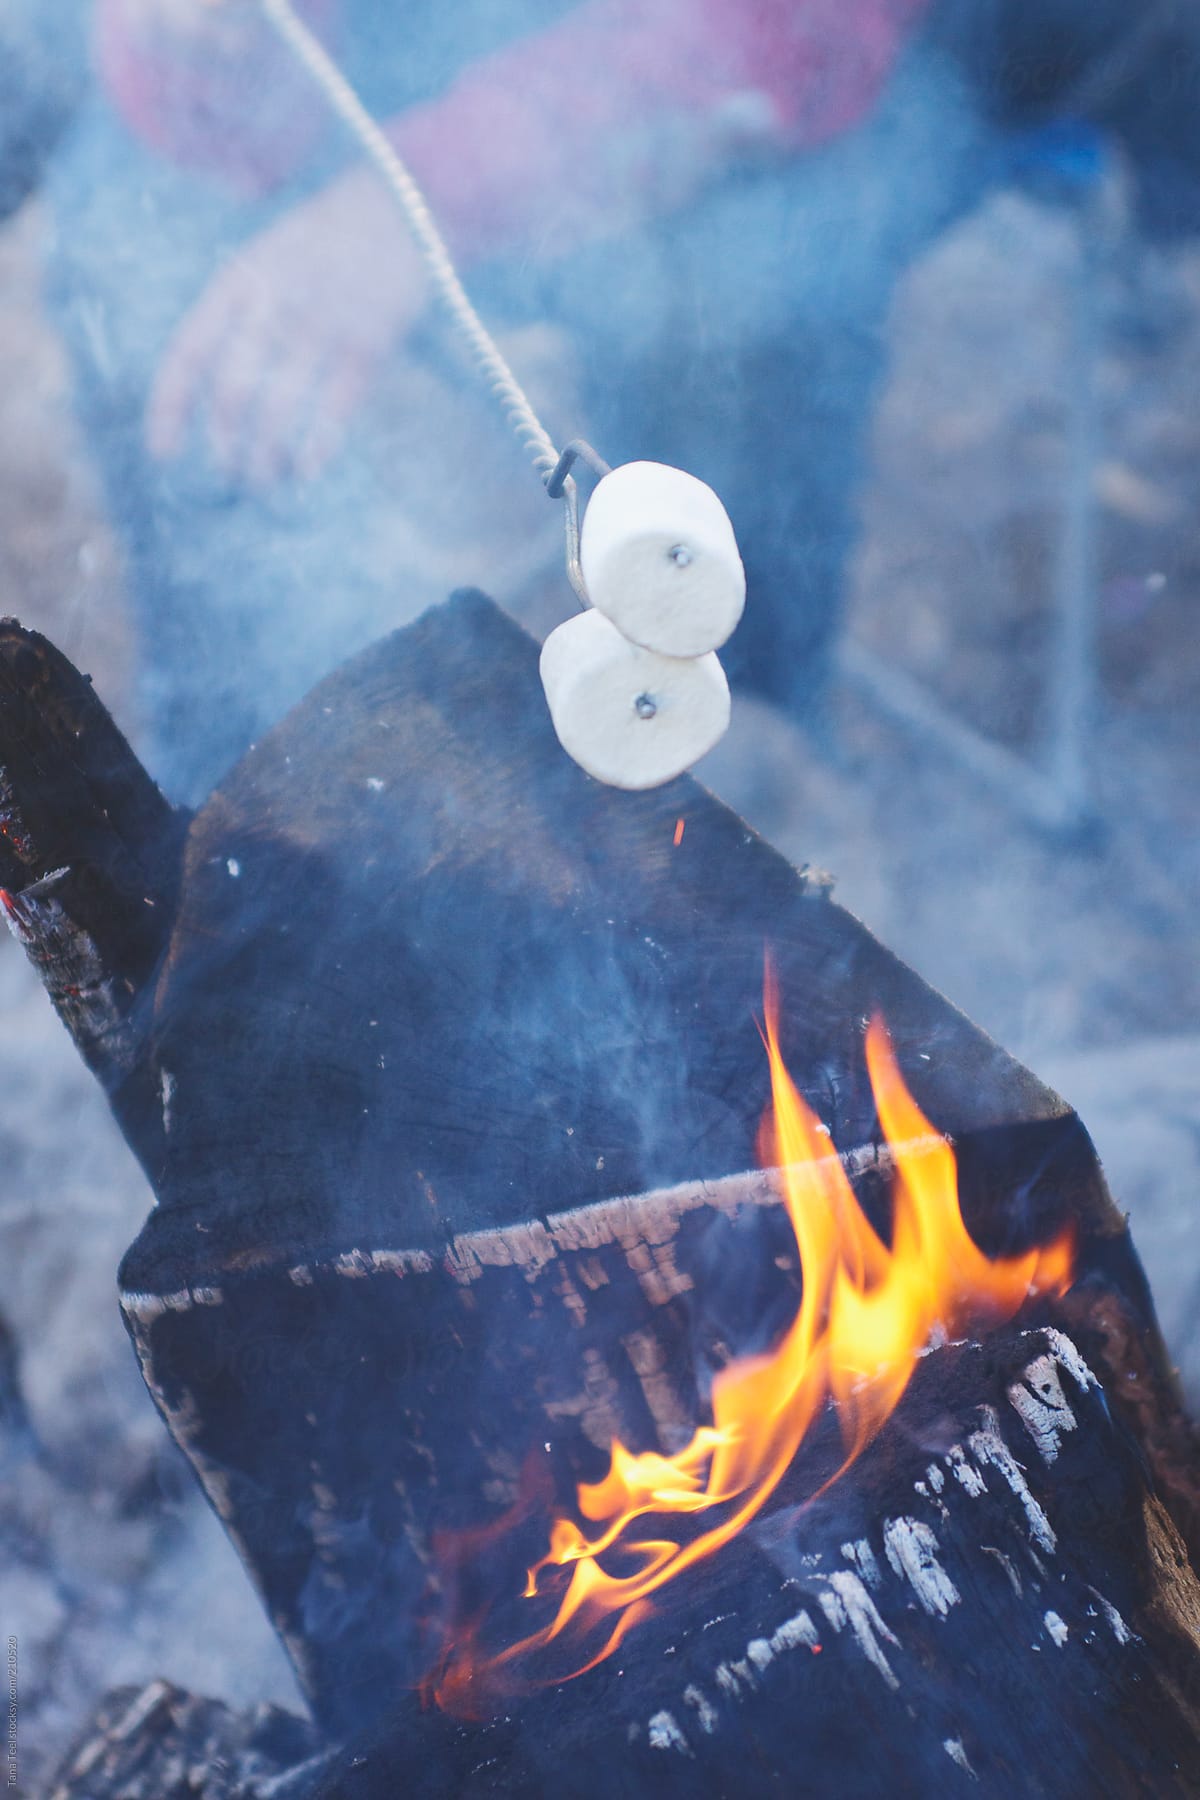 Marshmallows roasting over a campfire